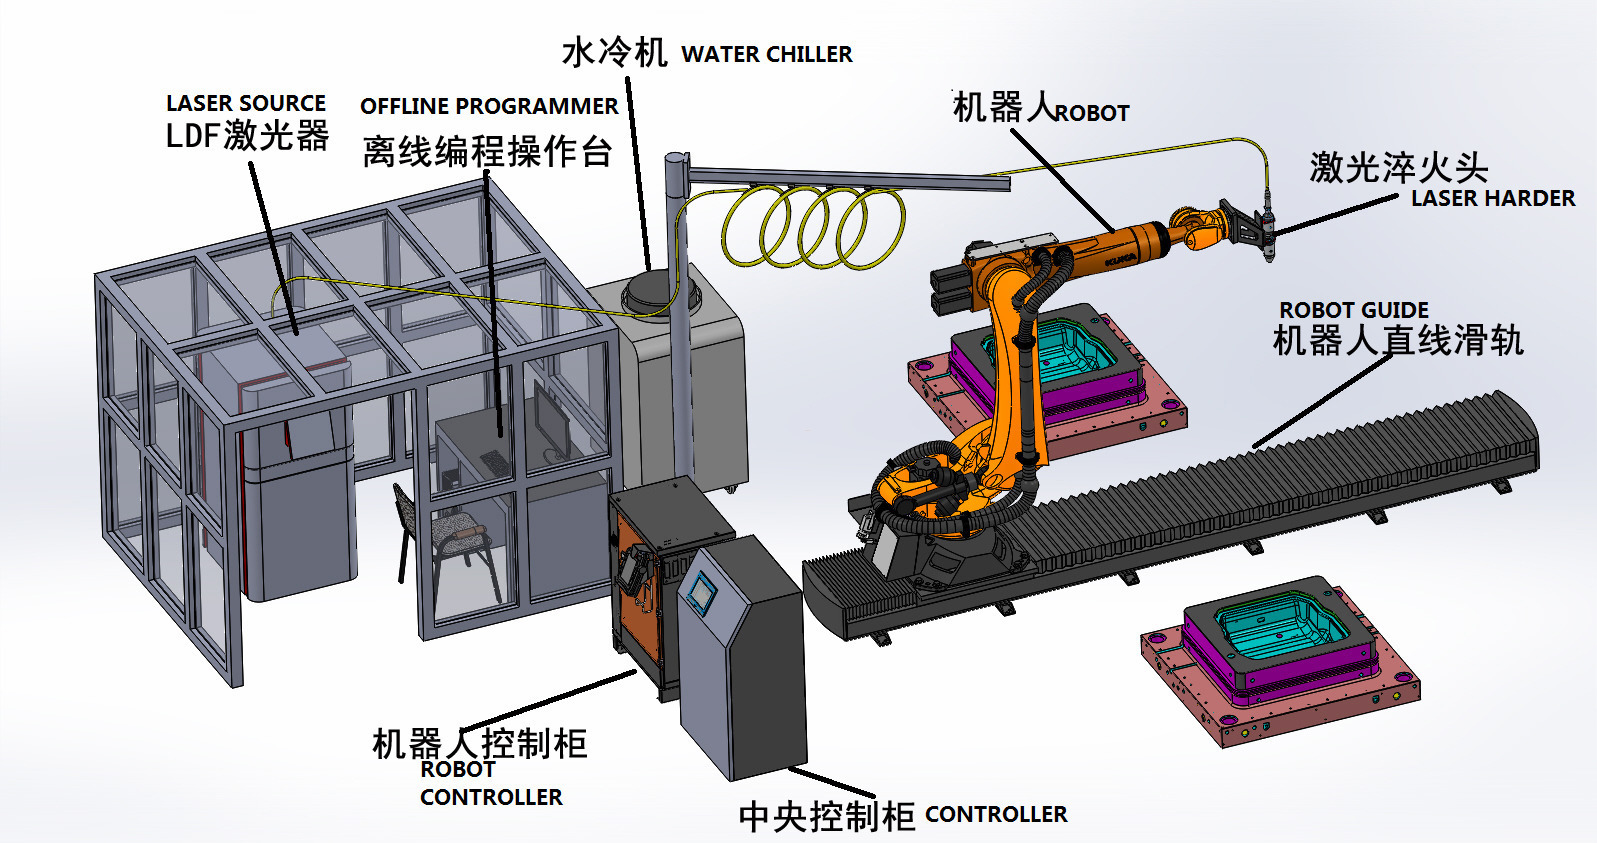 product-QUESTT-3000w laser hardening machine for metal surface treatment-img-2